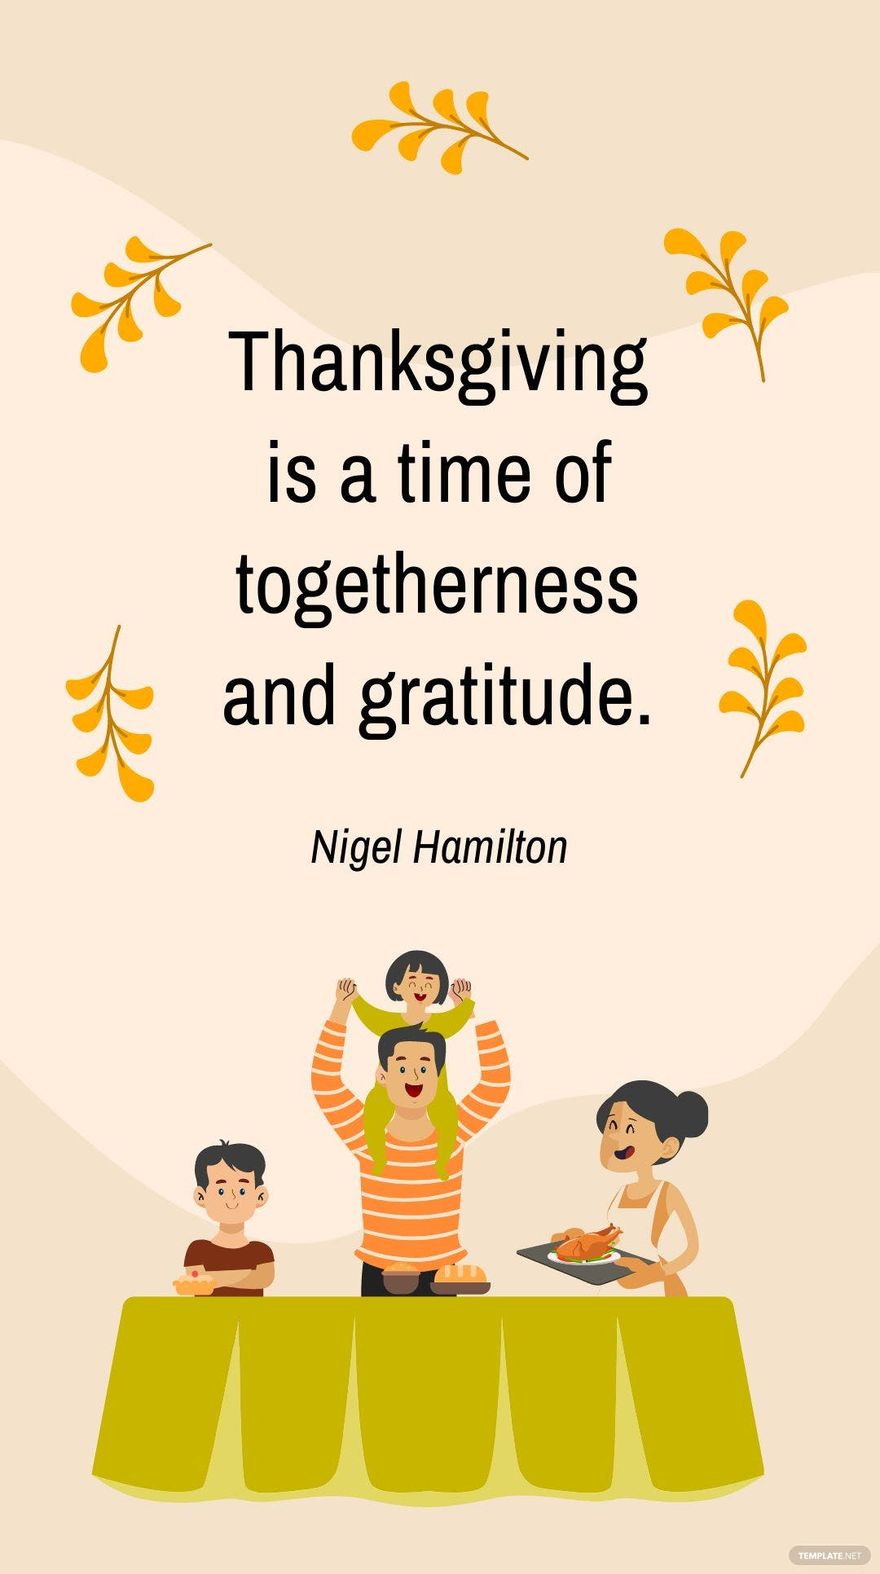 Nigel Hamilton - Thanksgiving is a time of togetherness and gratitude.